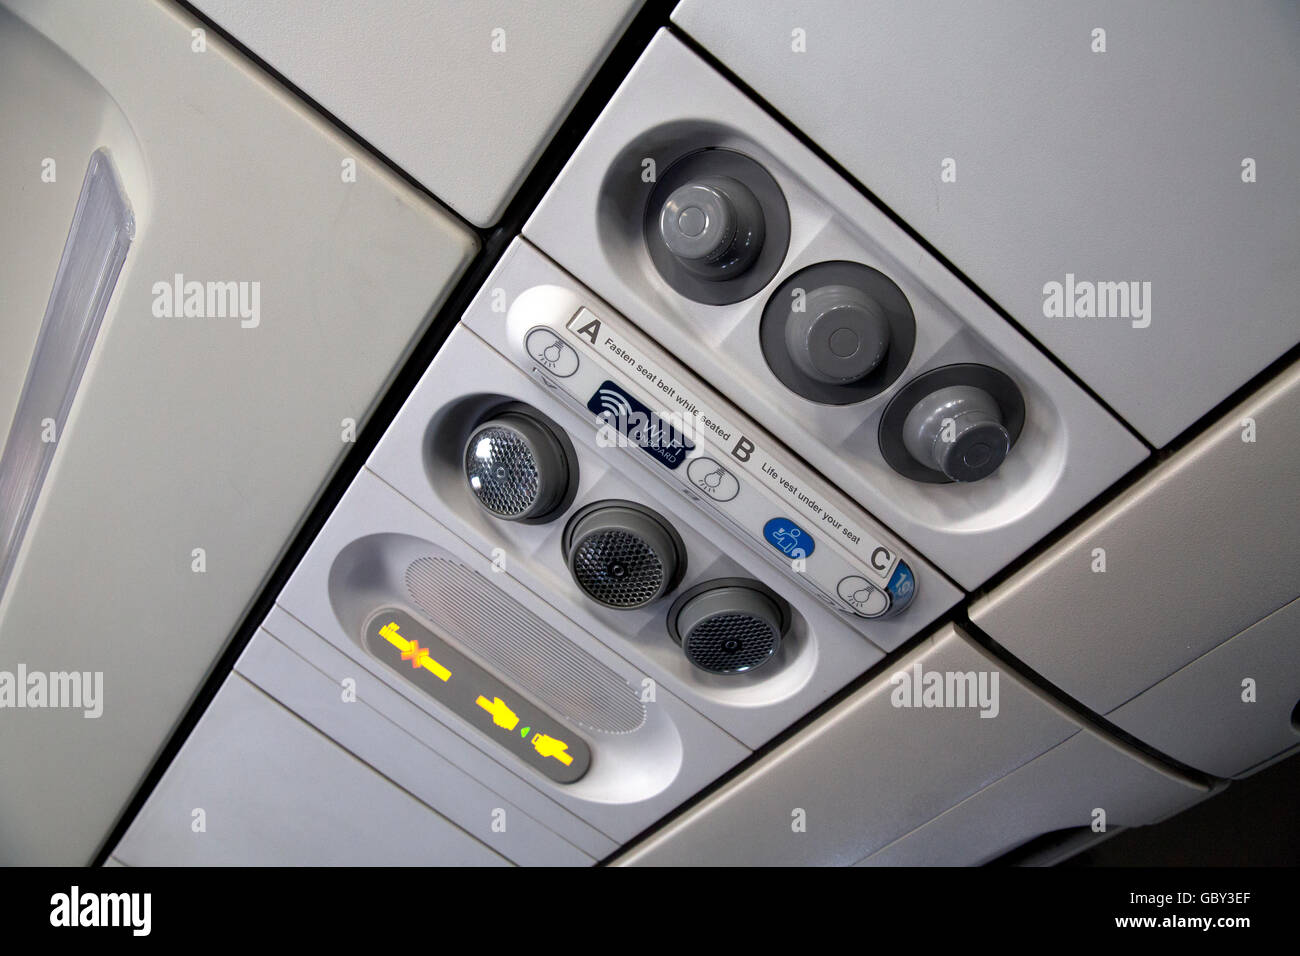 Overhead airline seat controls Stock Photo